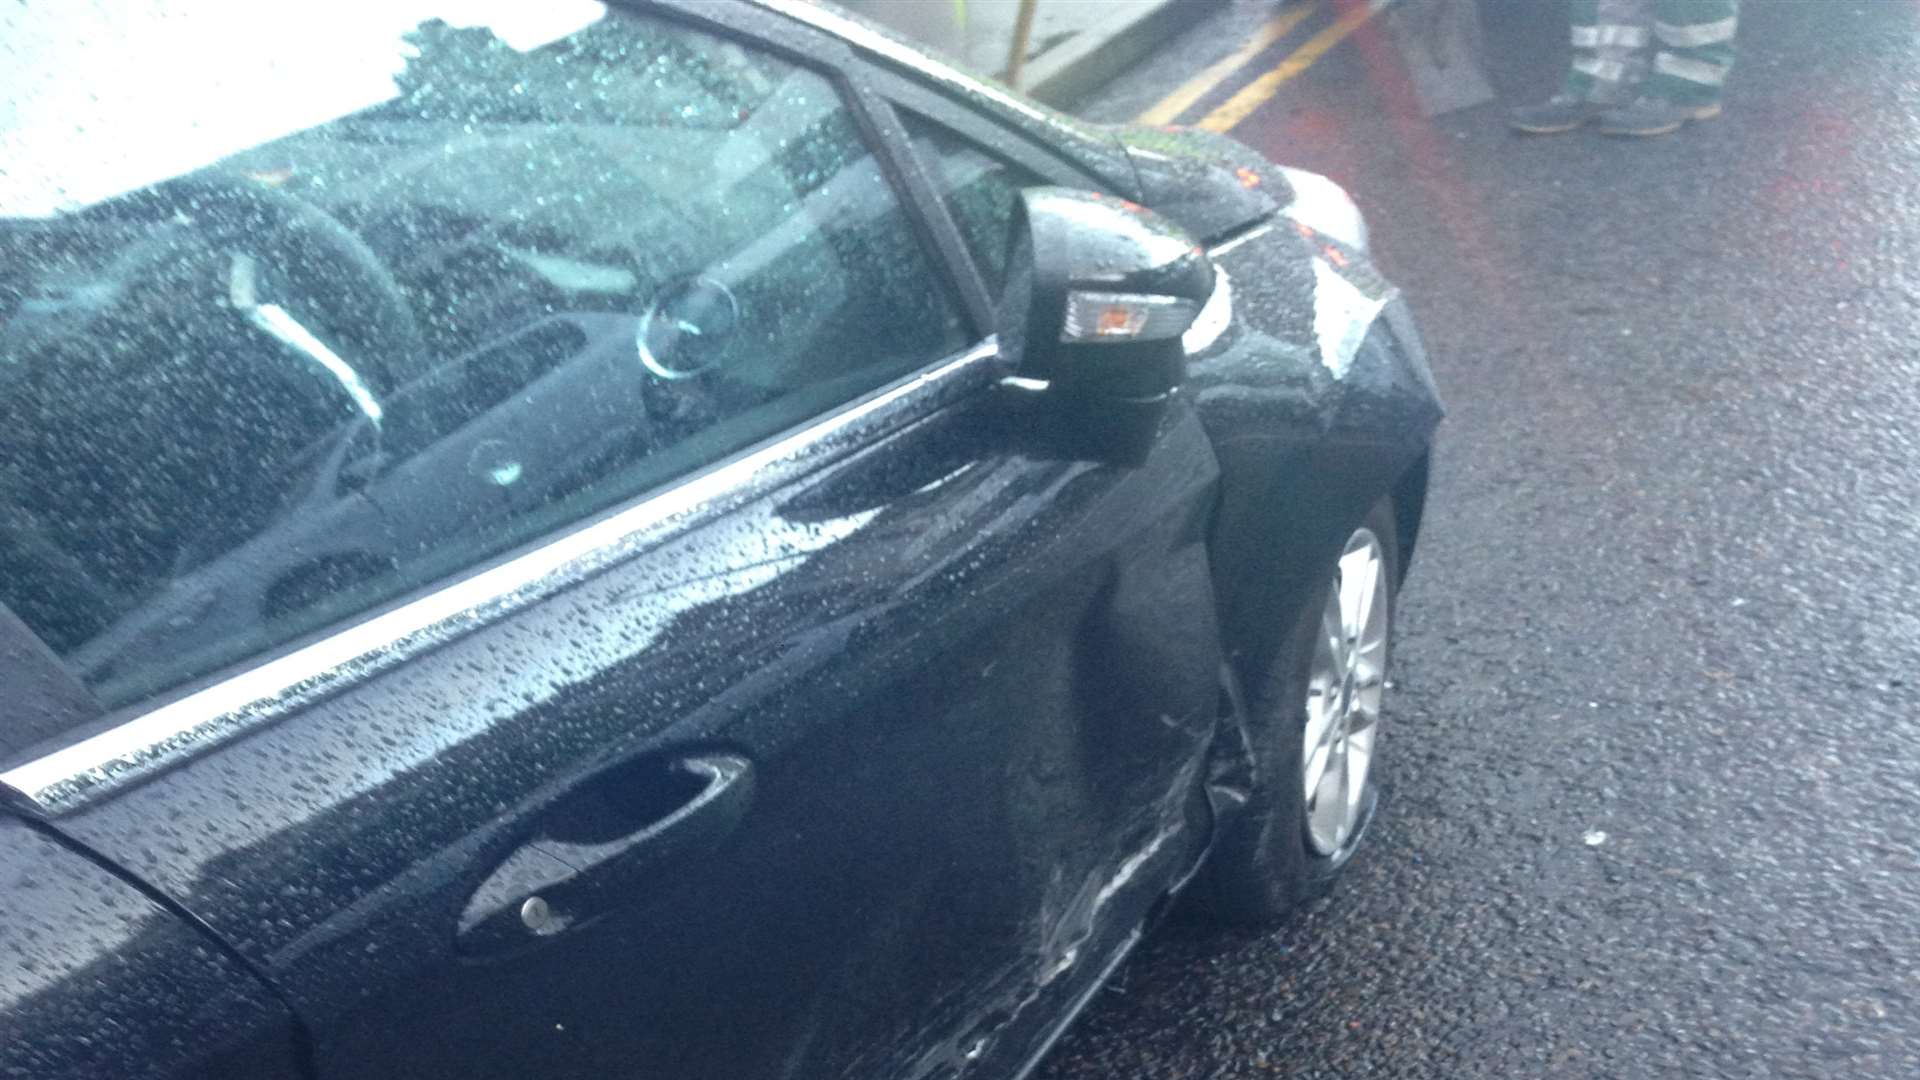 The black Ford Fiesta which was hit in Sheerness High Street.